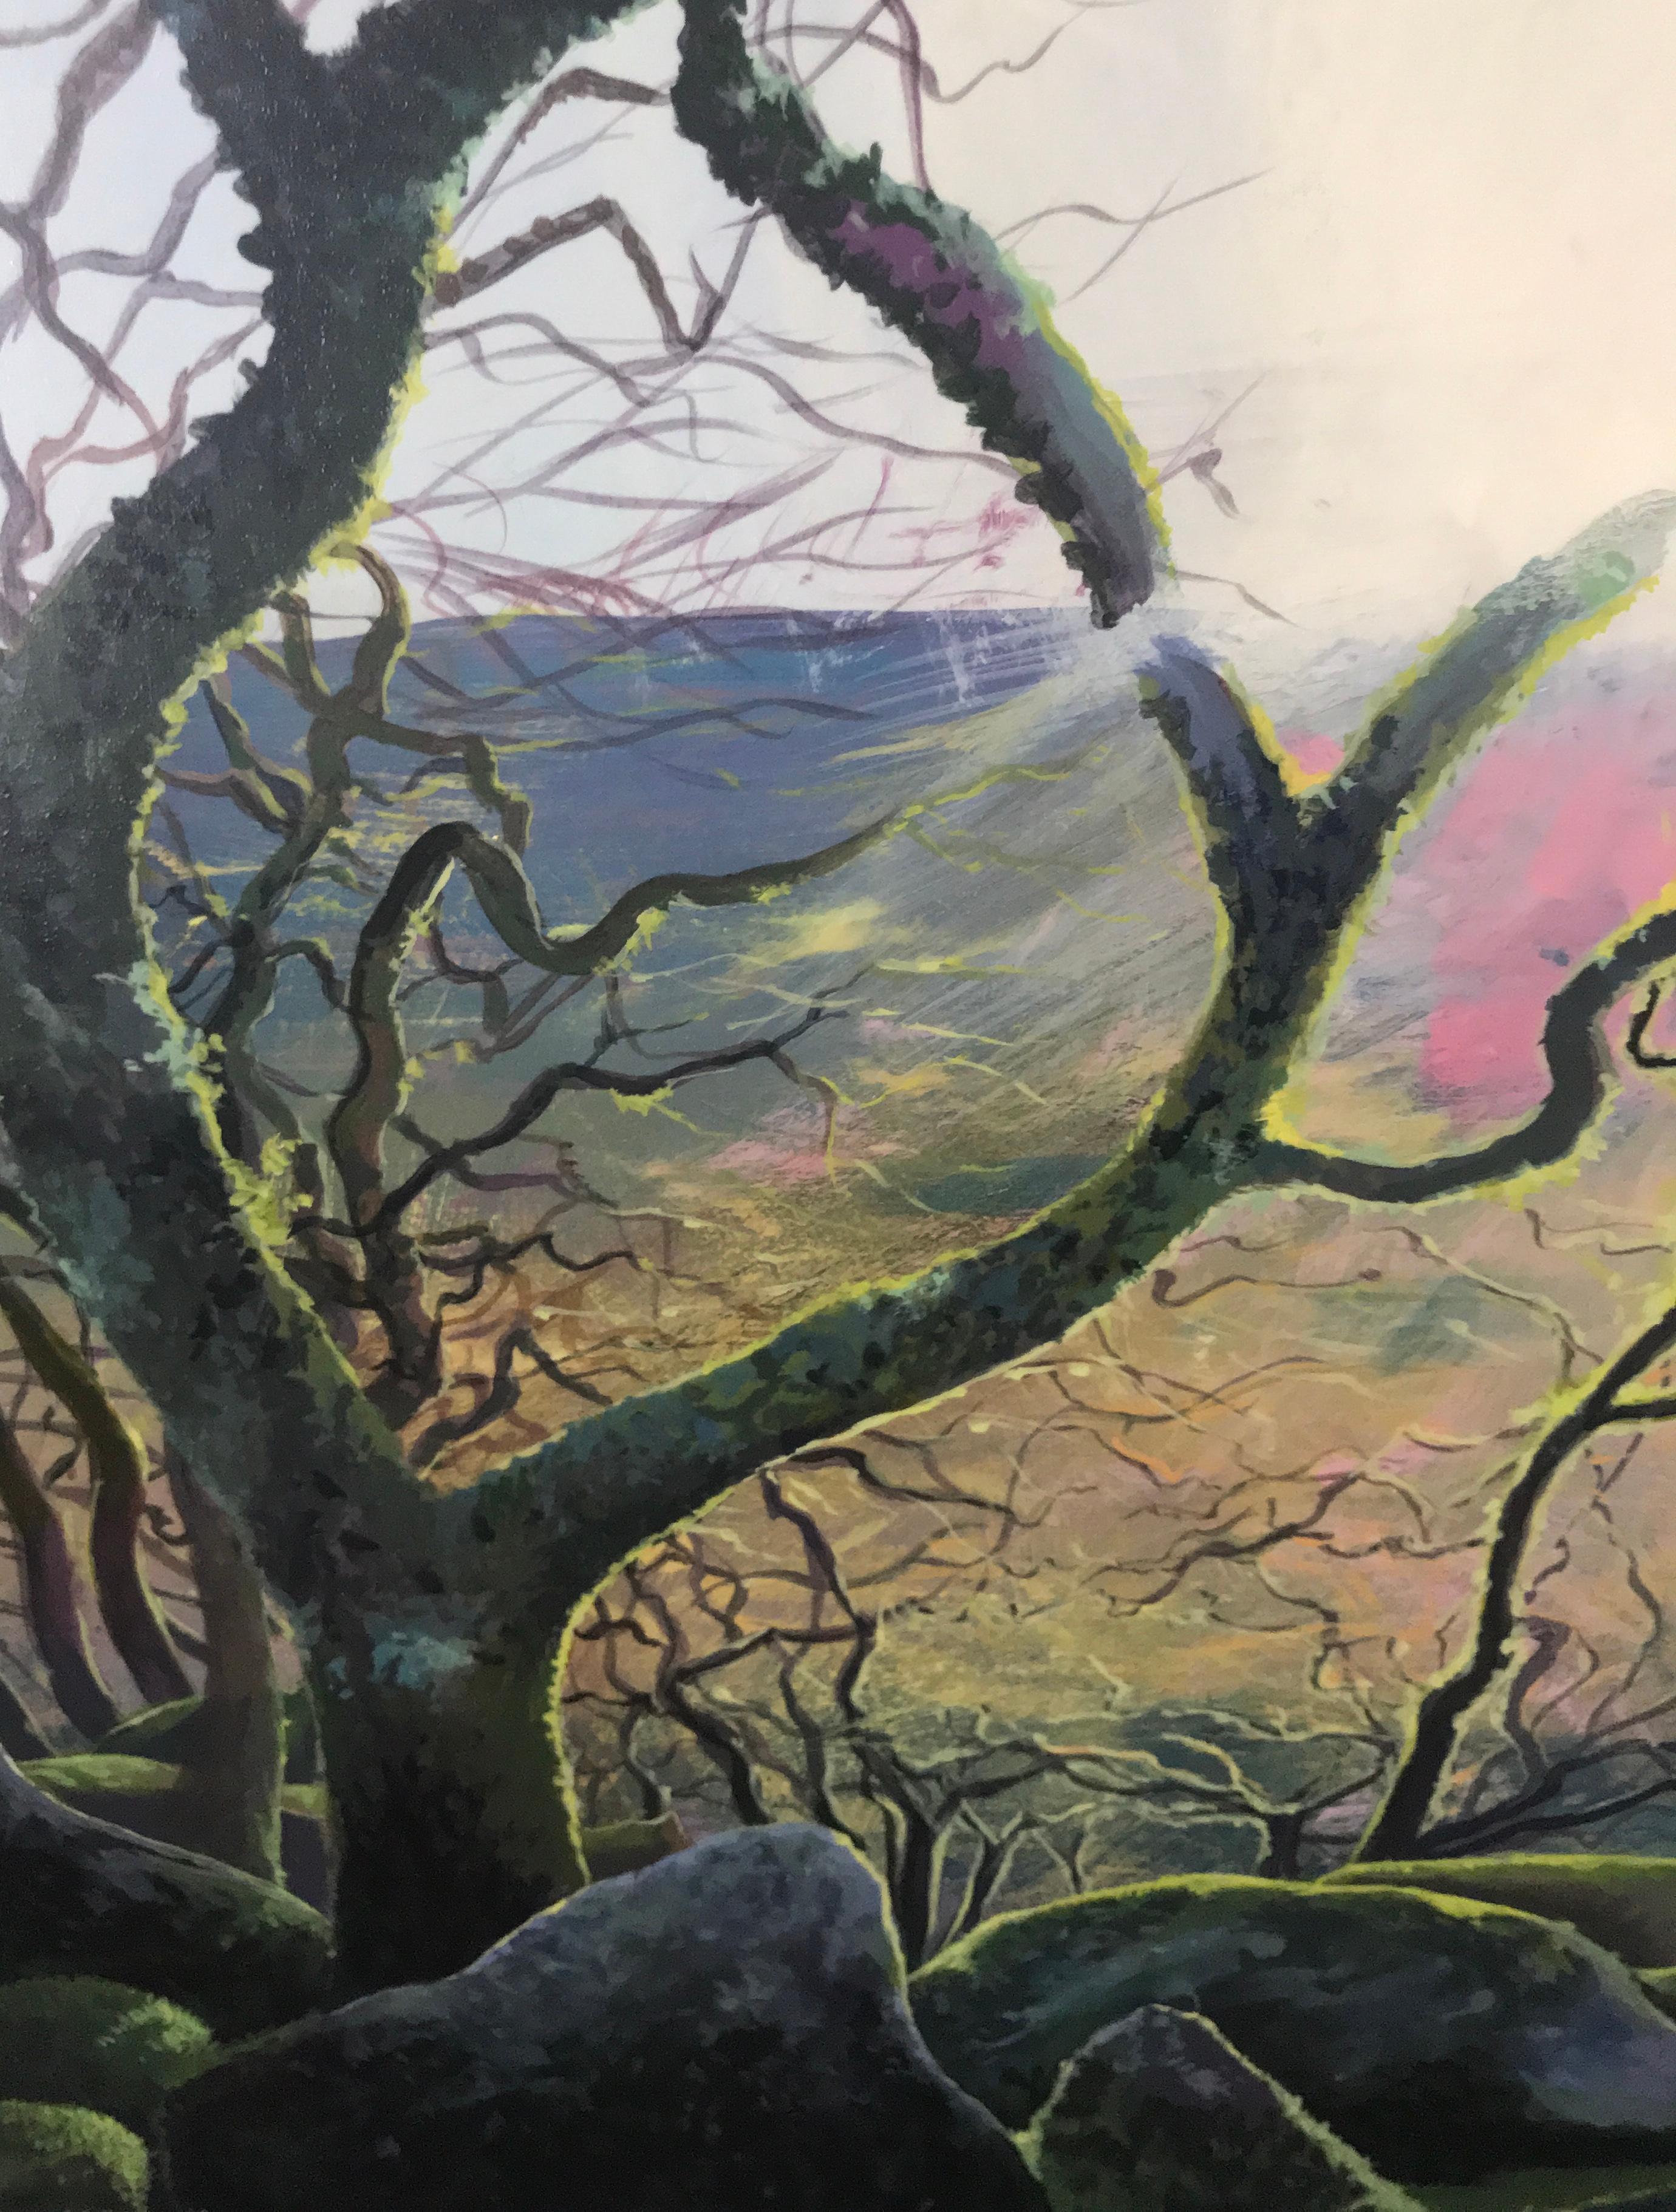 Debbie Baxter is a well know English tree artist

Acrylic on canvas
Image measures: 100 x 80cms.